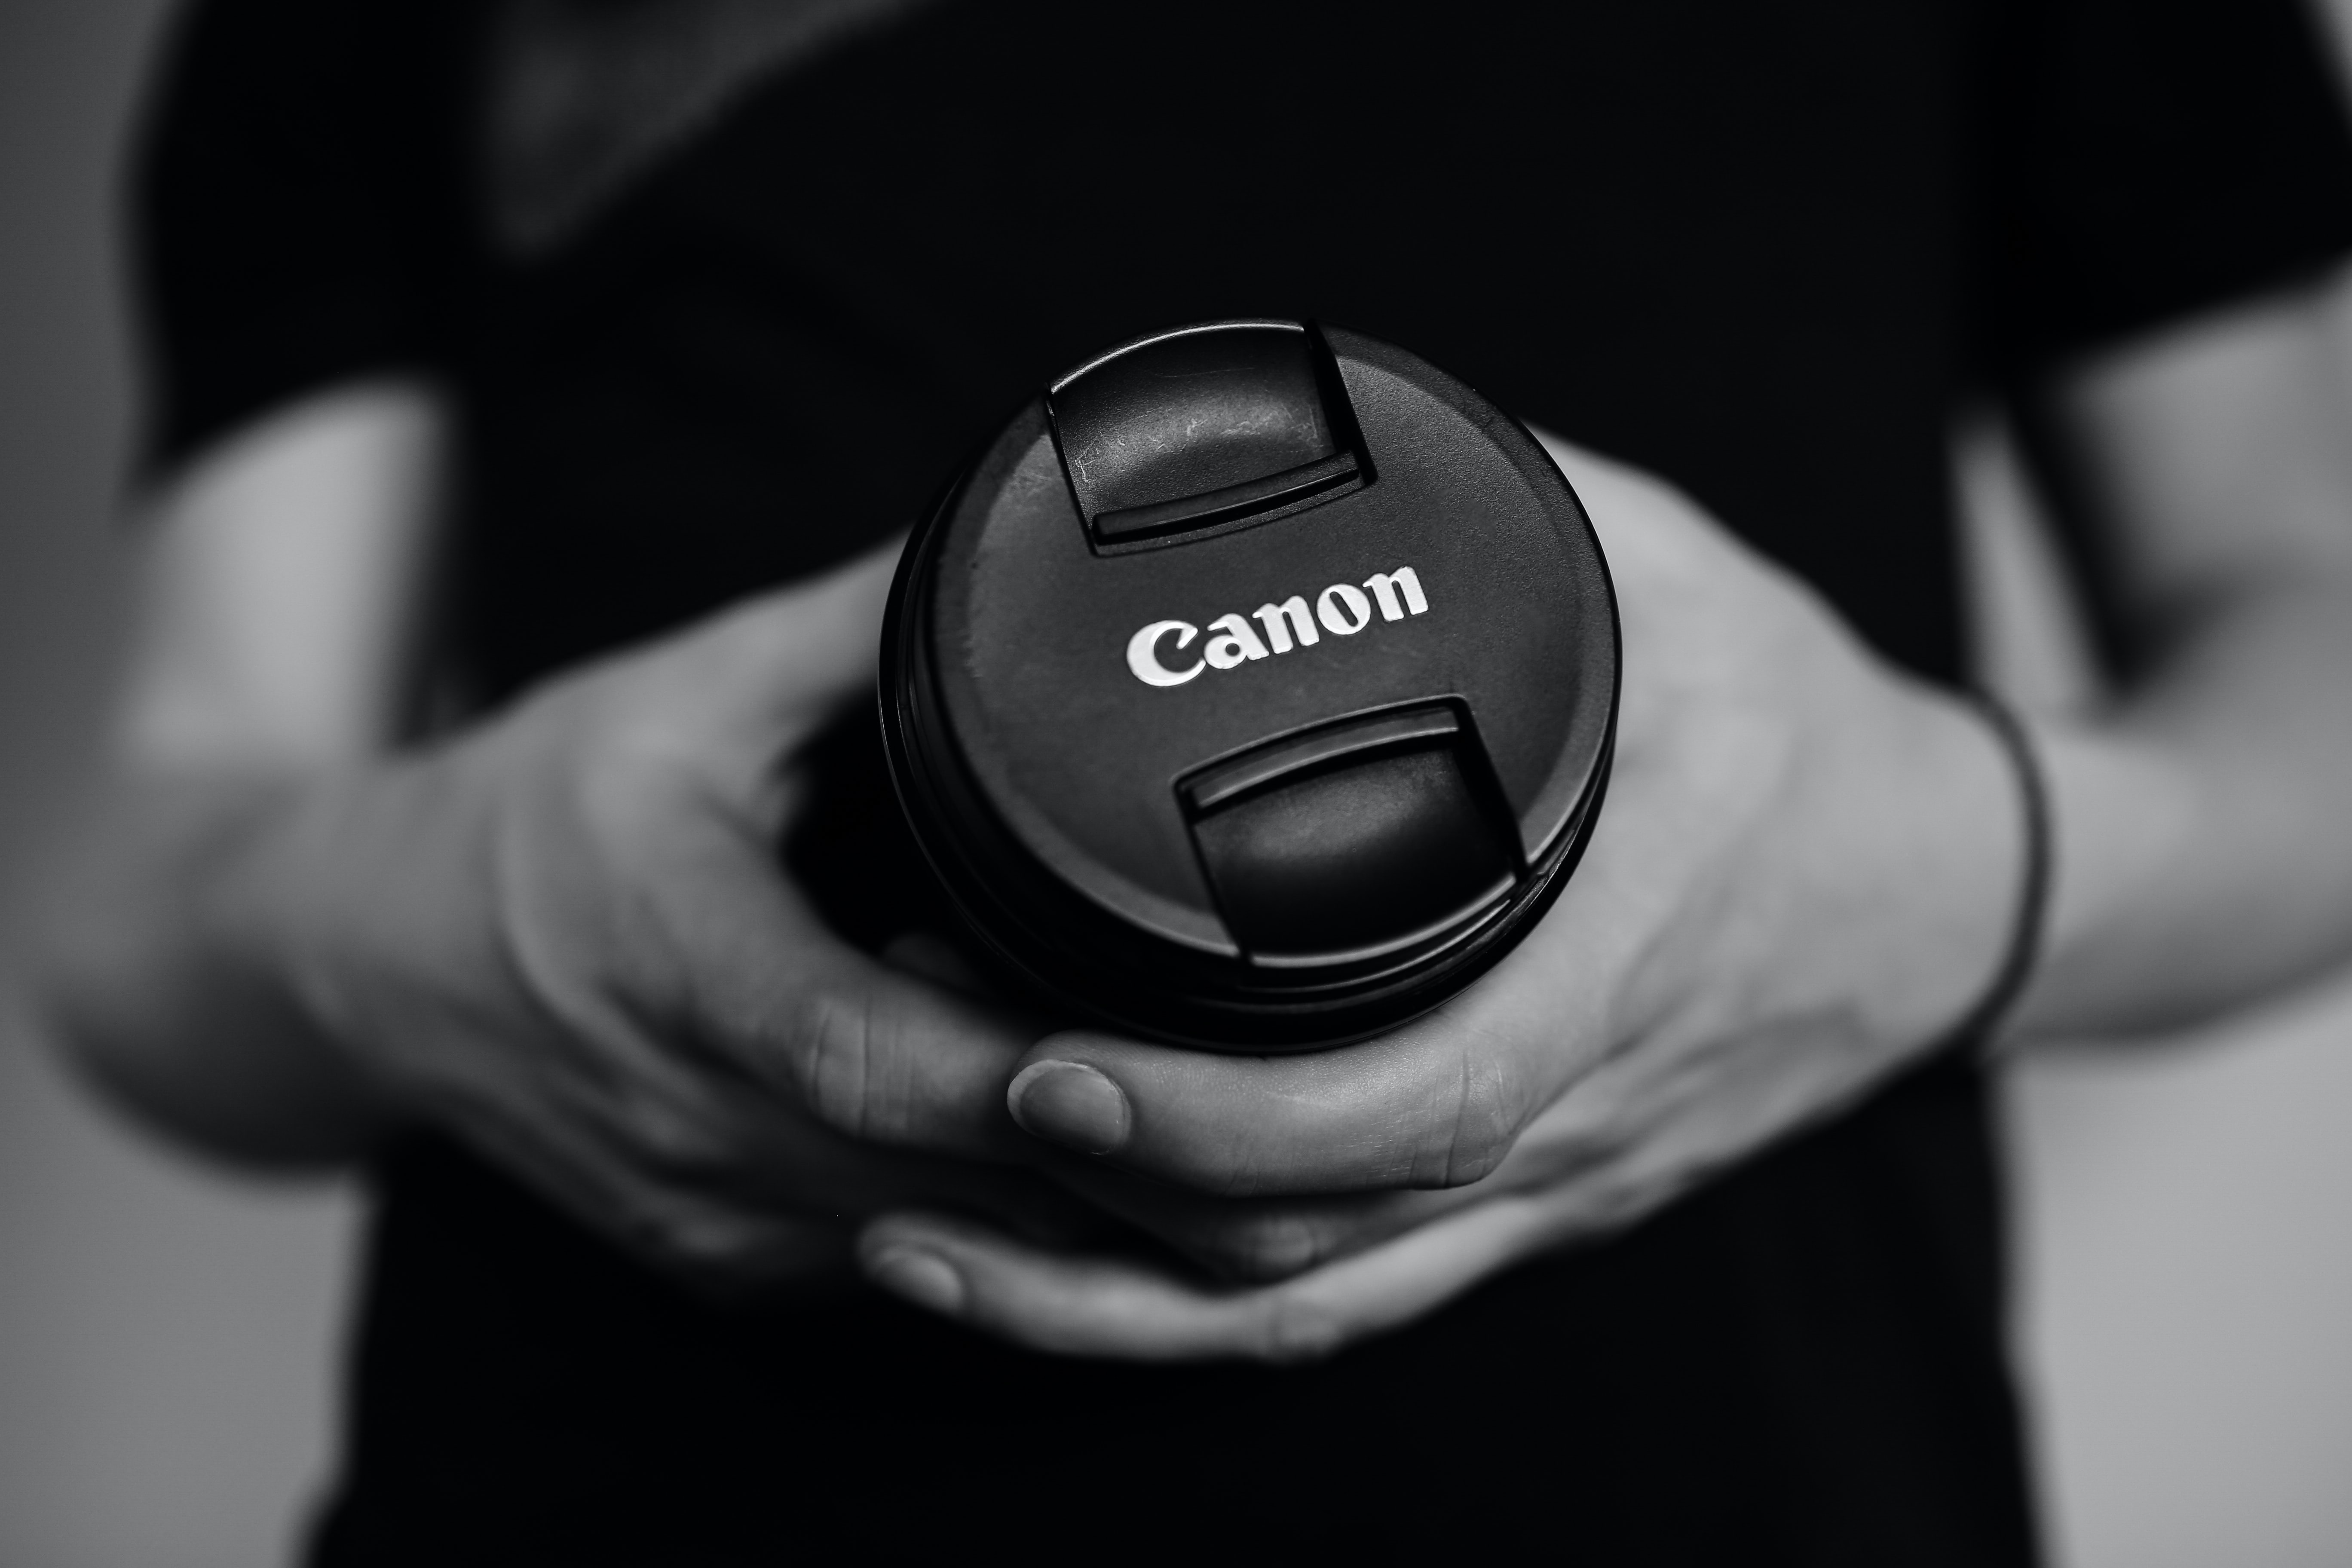 Canon's Virtual Product Launch: Three Reasons Why You Should Watch on July 9th